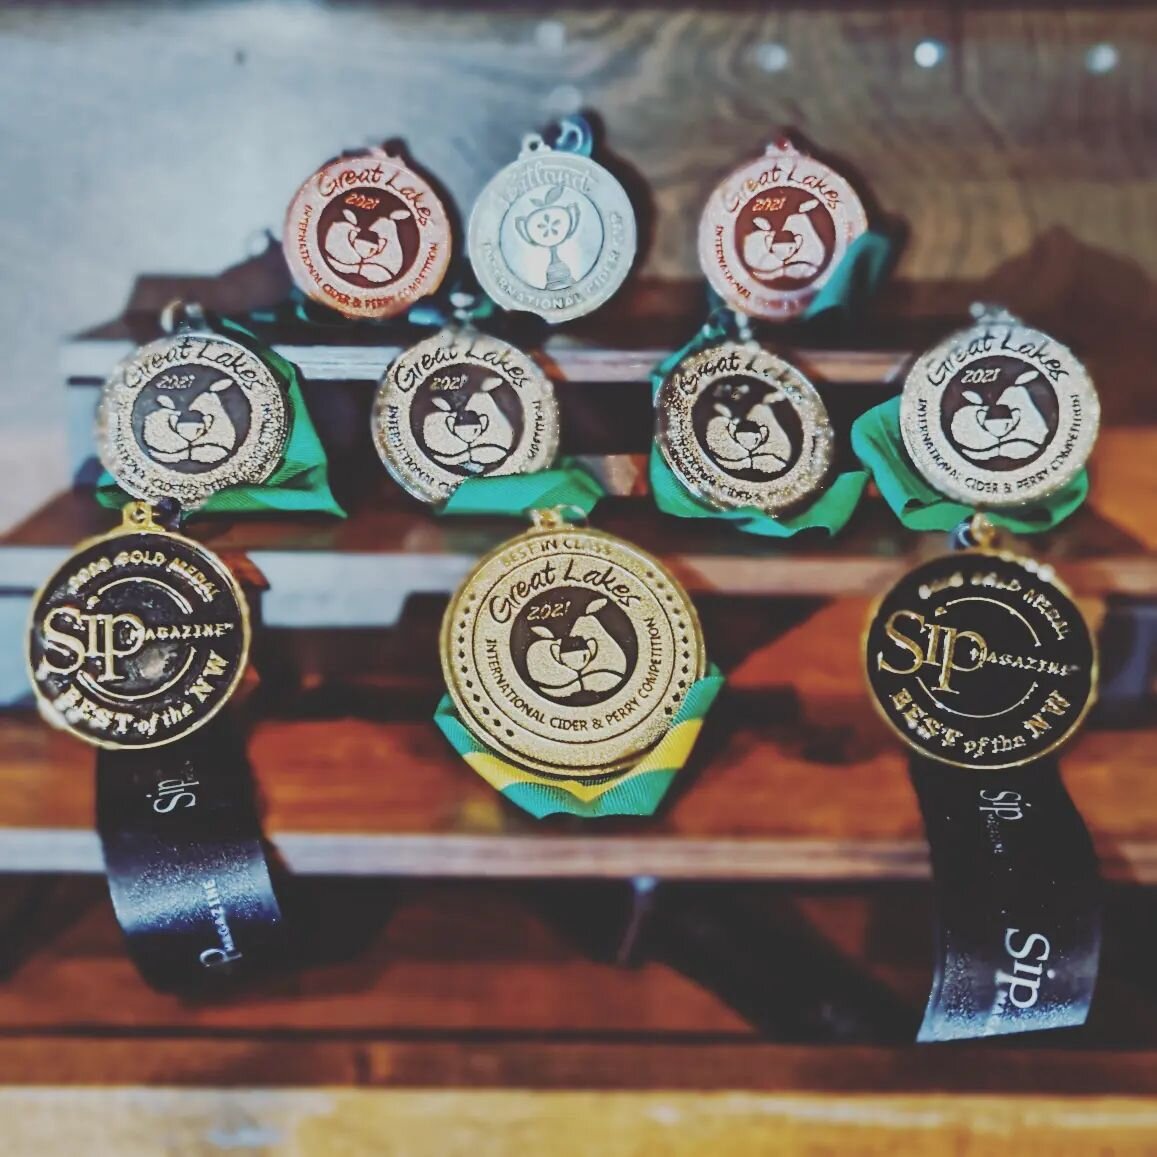 I made Jacob a little shelf to display his medals in the taproom. I think he's gonna make me have to get another shelf sooner than I imagined.